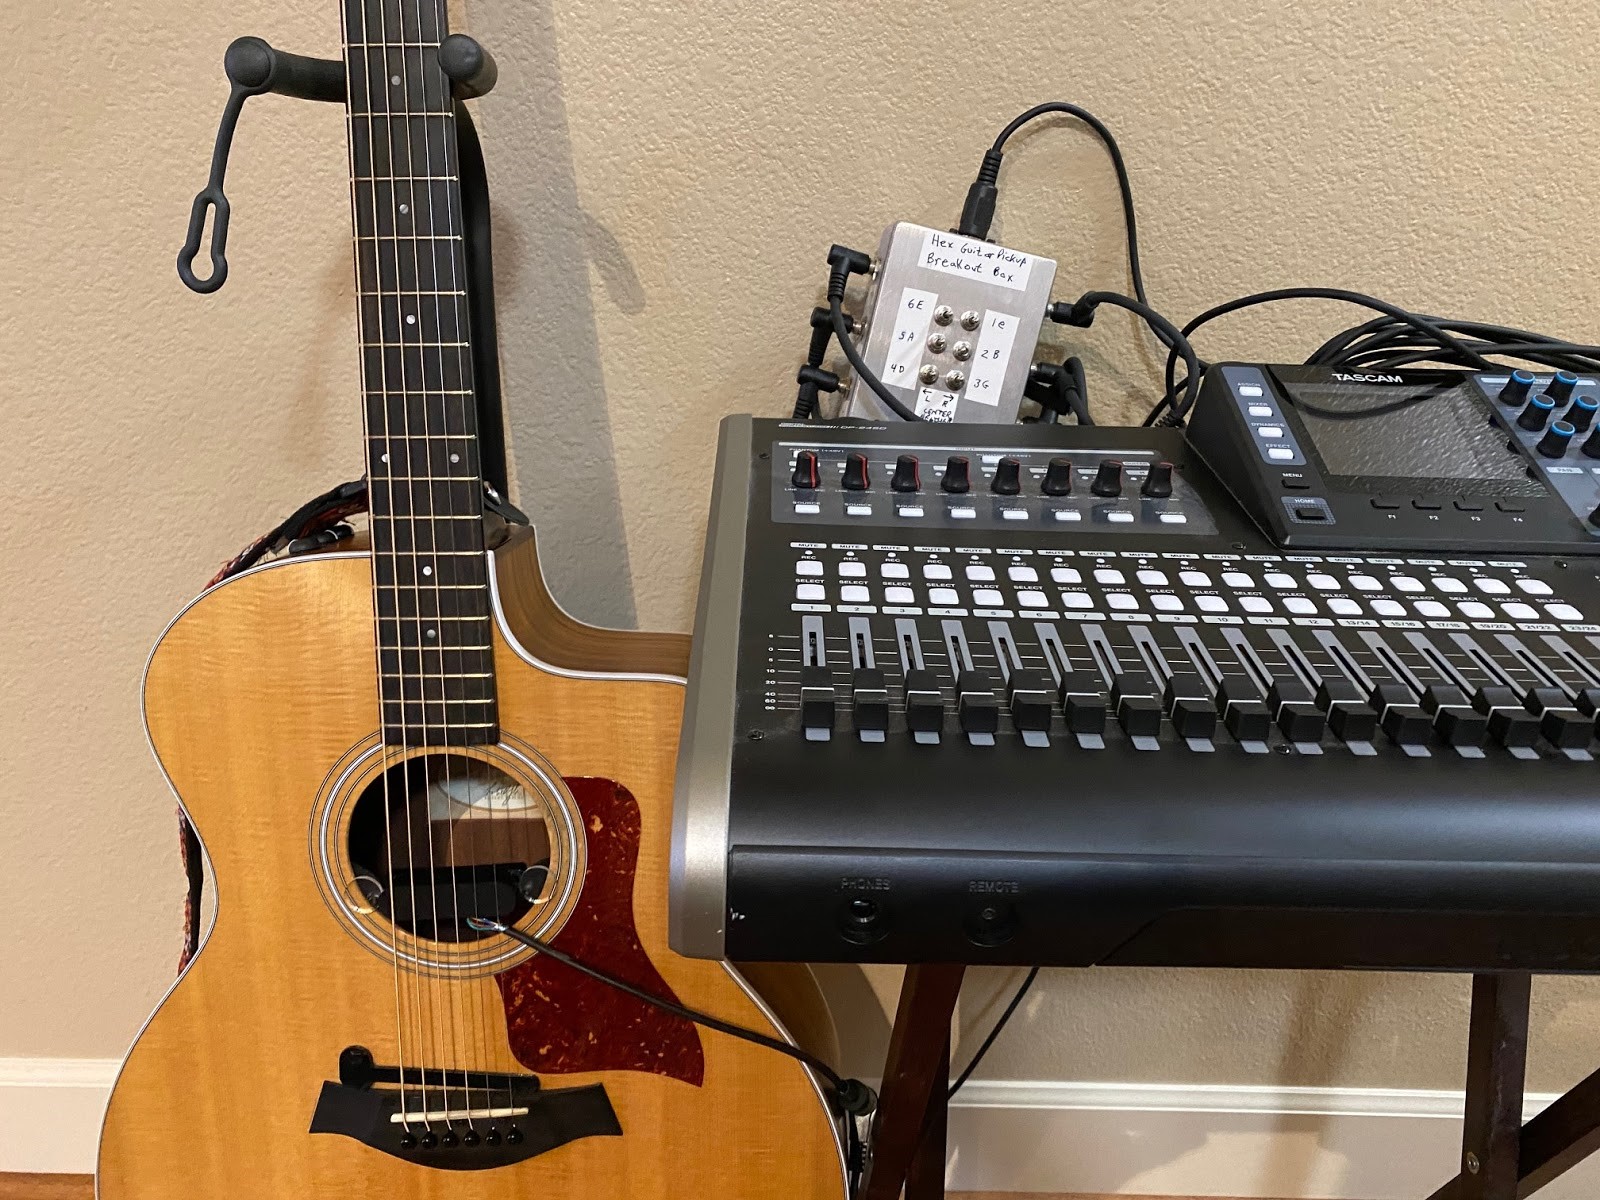 guitar and electronic music equipment